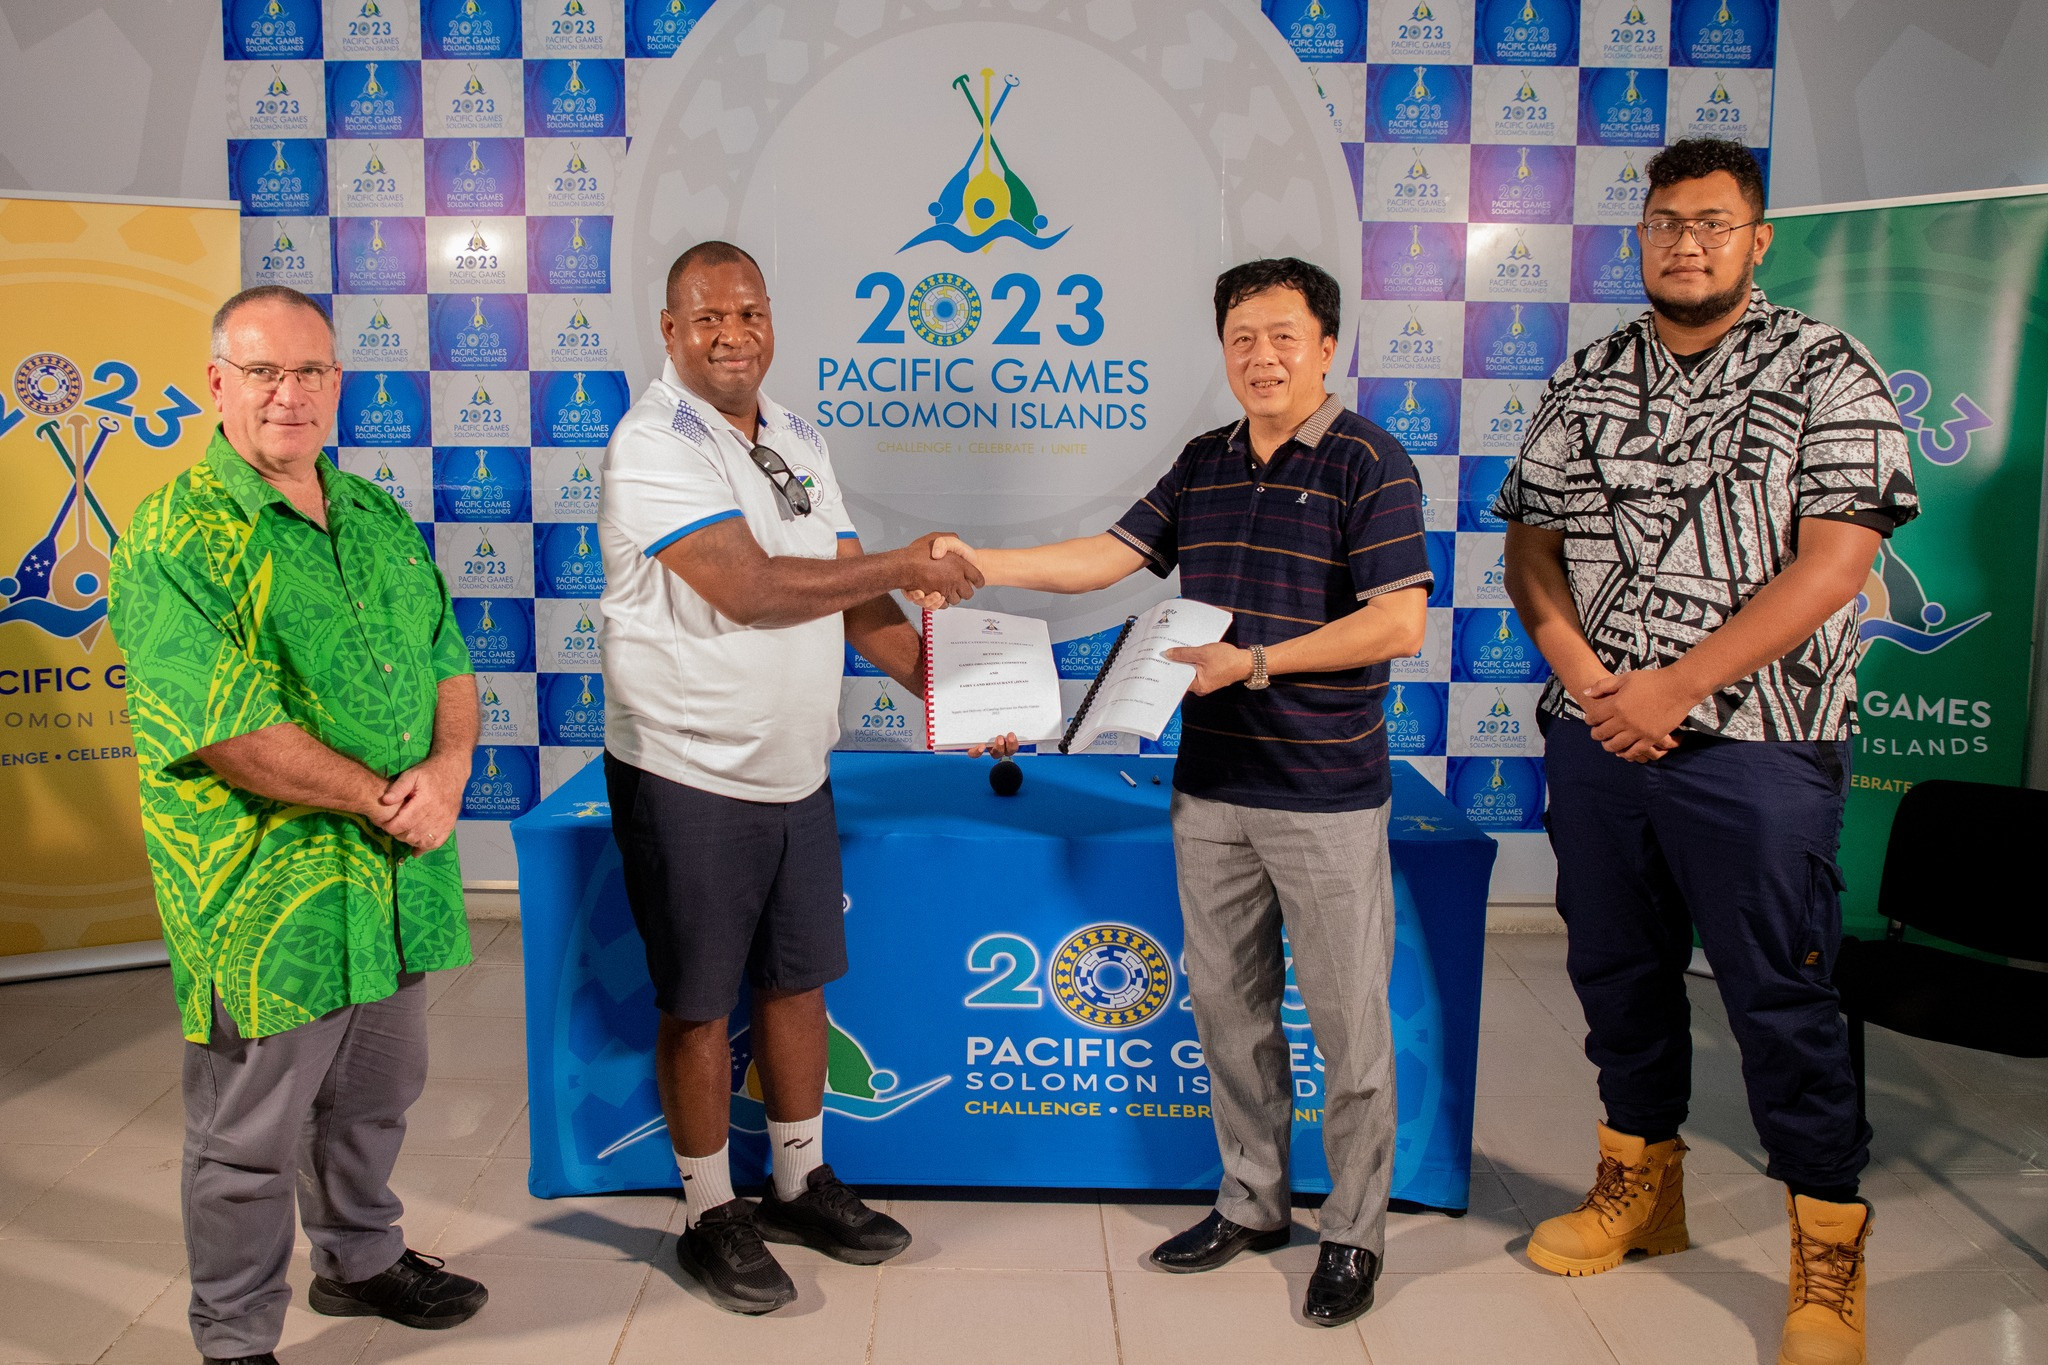  Fairyland Restaurant has been named the official master caterer for the 2023 Pacific Games ©Solomon Islands 2023 